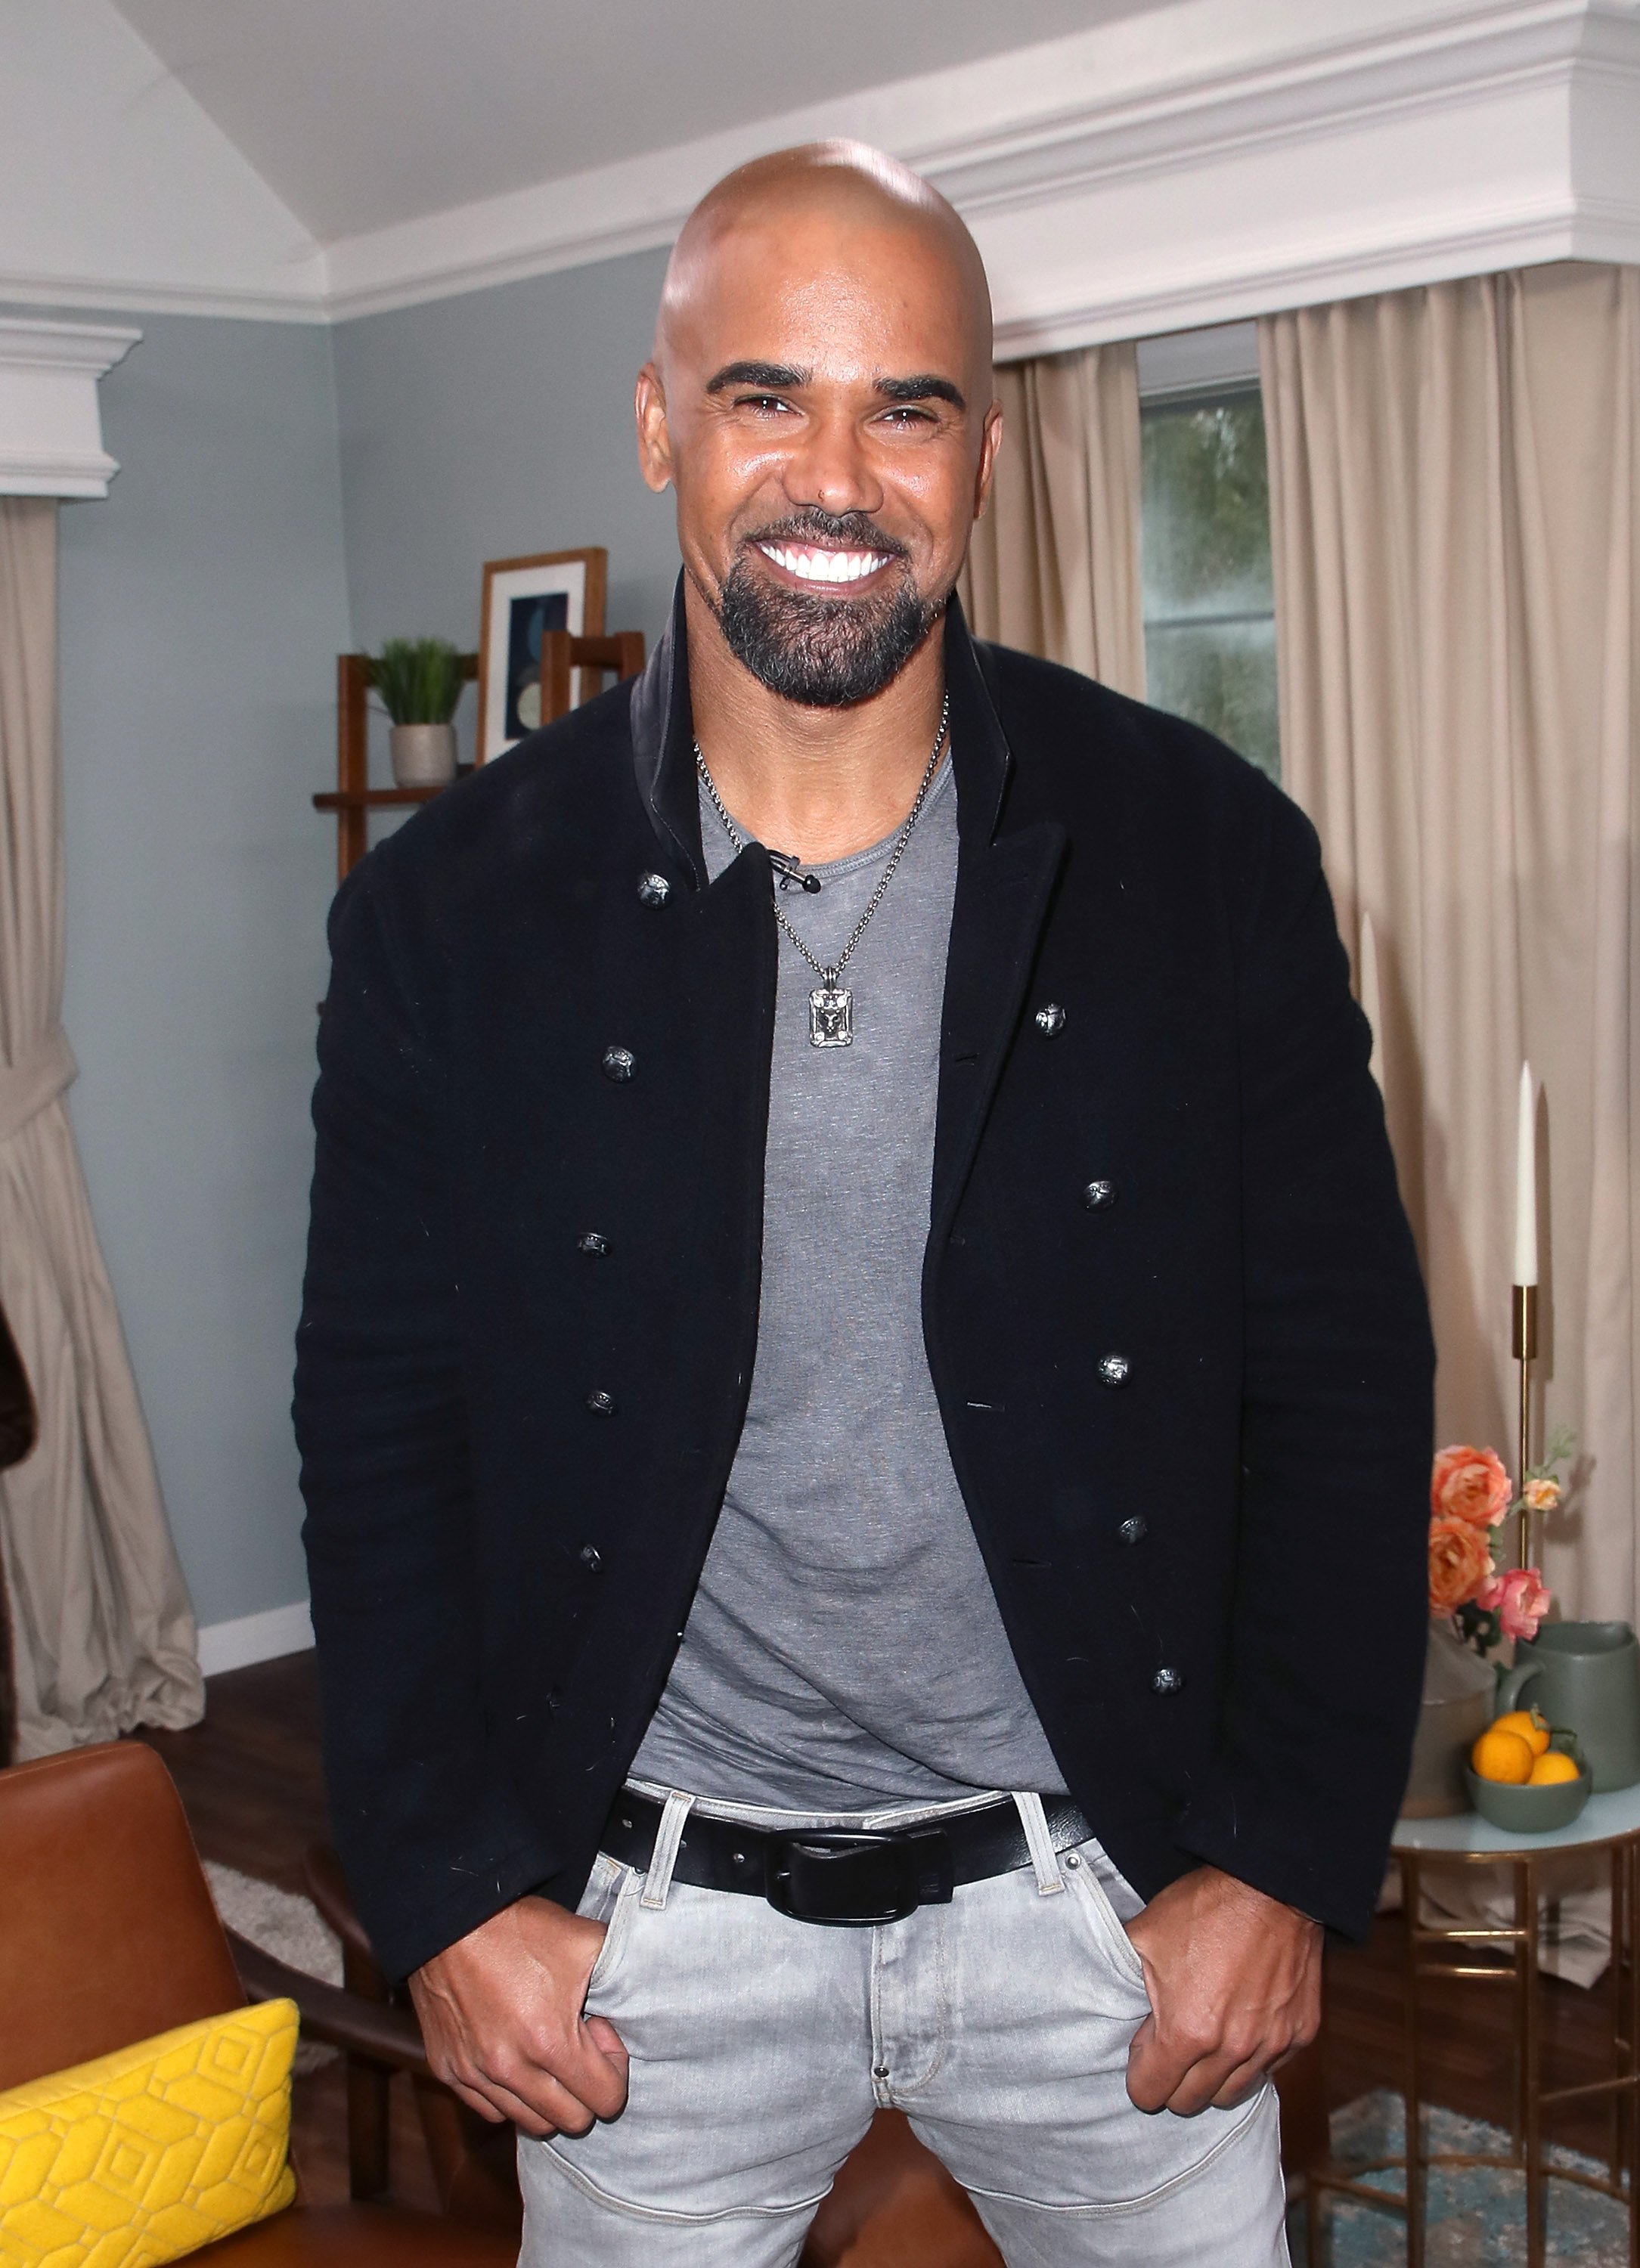 Shemar Moore visits Hallmark's "Home & Family" on February 27, 2018, in Universal City, California. | Source: Getty Images.